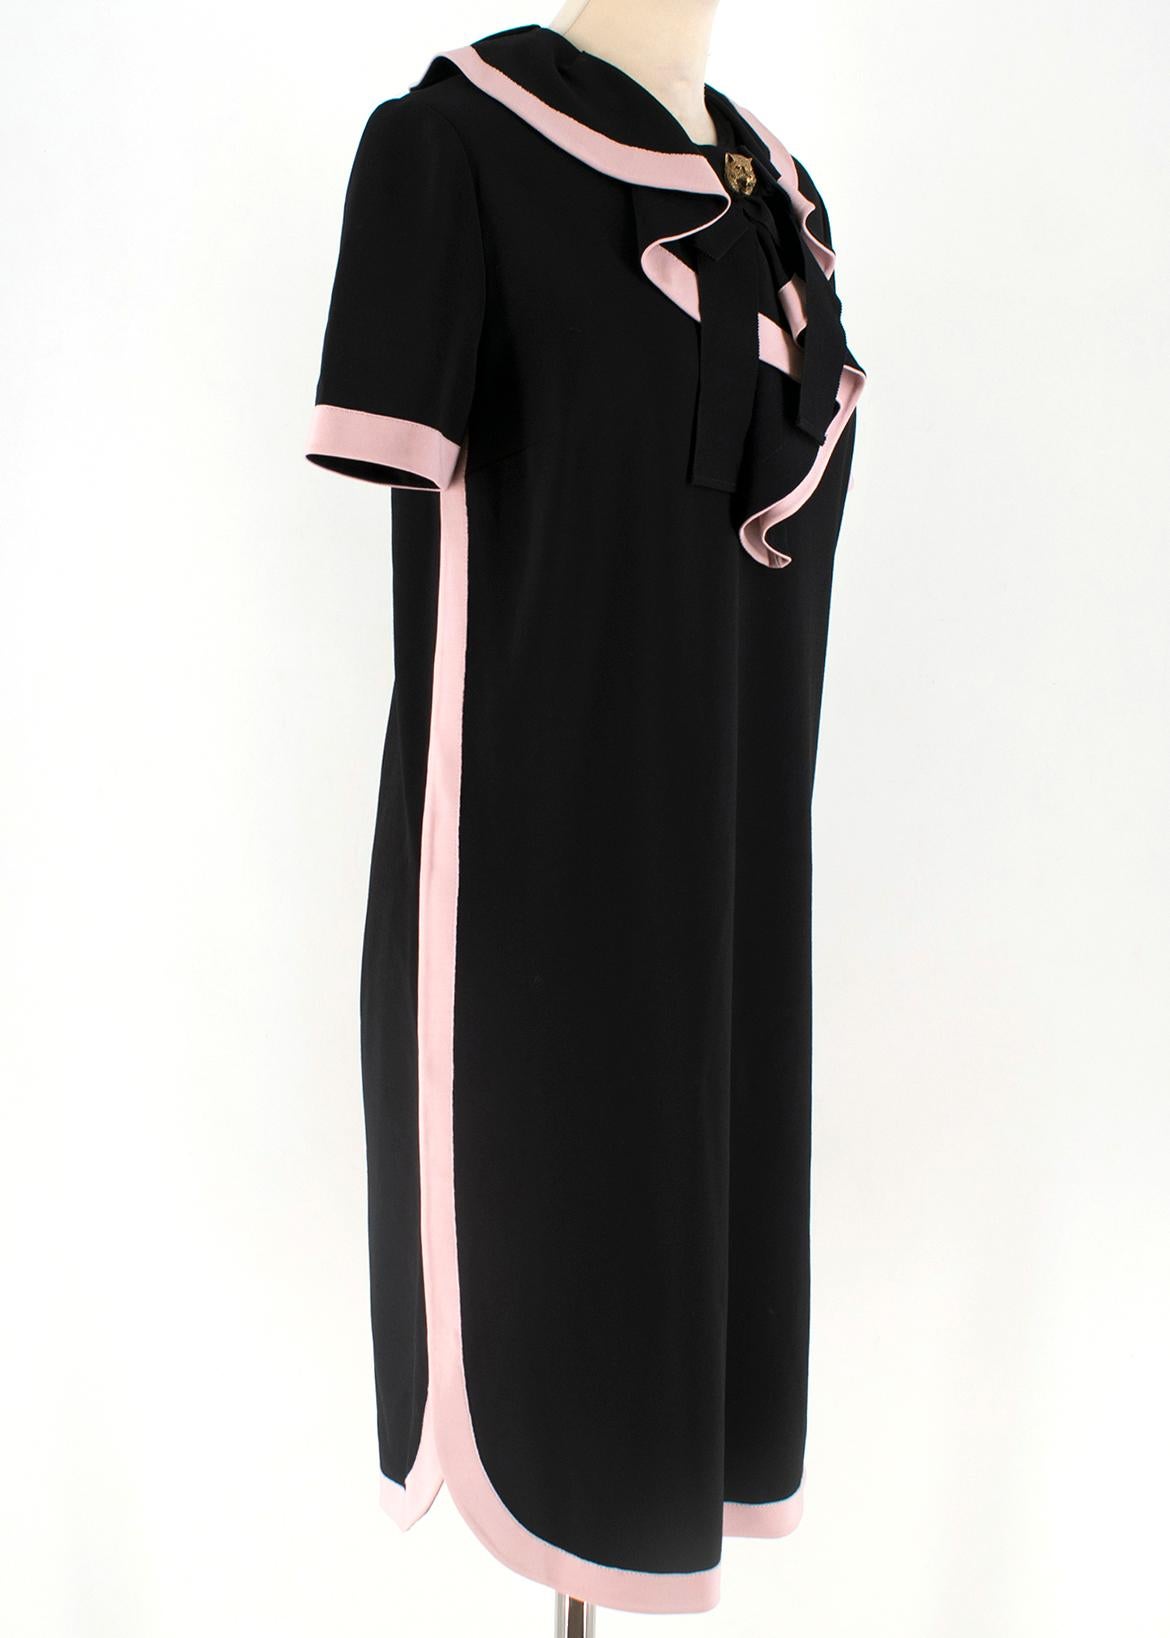 Gucci Front Ruffle Black and Pink Dress 

-Front ribbon with Gucci tiger detail 
-Baby pink color cuff, color  
-Ruffle front 
-Back zip(Good condition)
-Half sleeve
-Rounded side slits 

Please note, these items are pre-owned and may show signs of